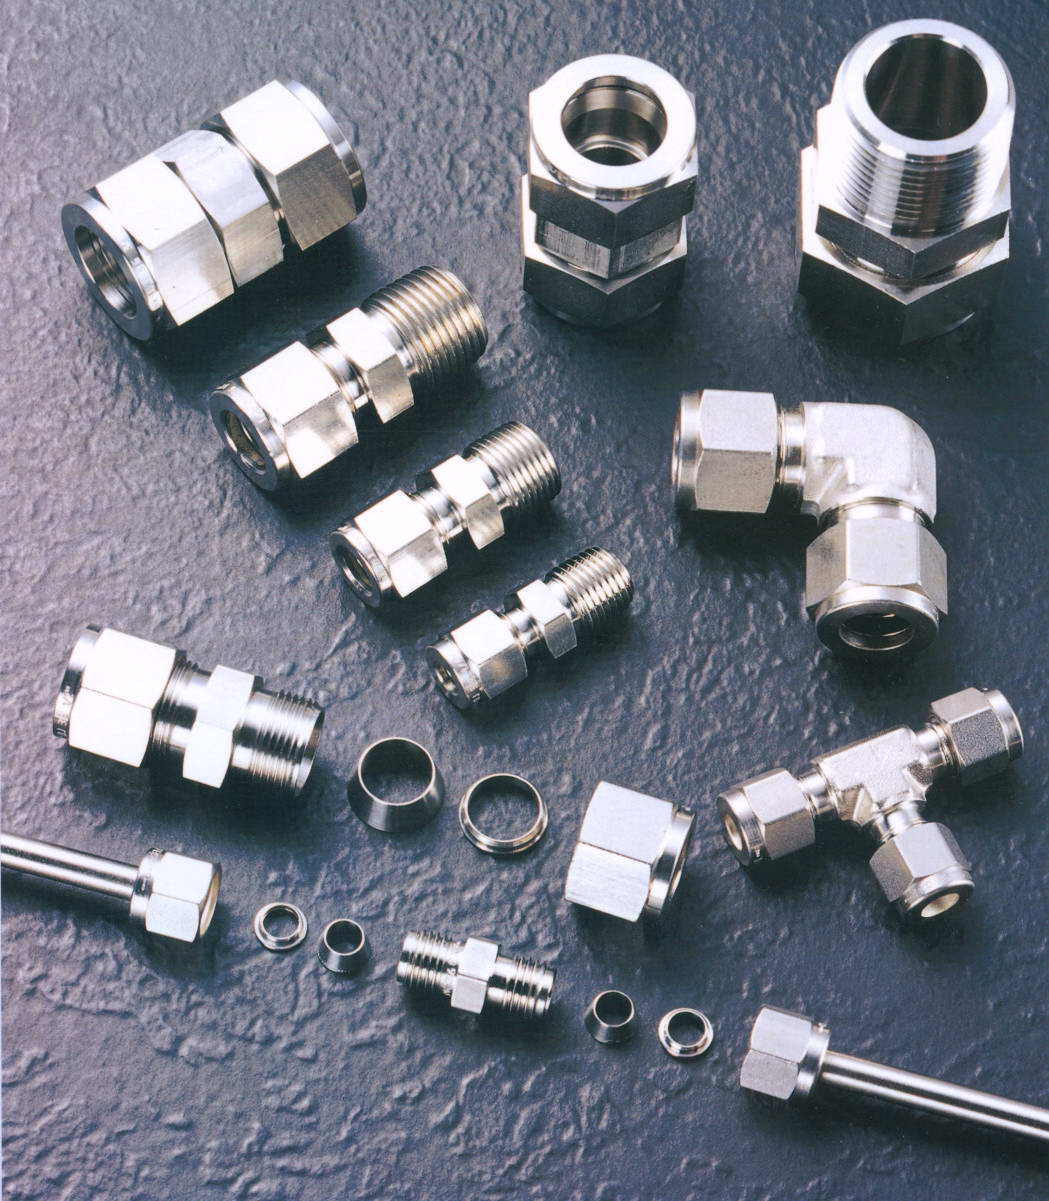 VCR 管件, VCR接頭, VCR閥門, 氣體管件 ( VCR Fittings / VCR Couplings Parker / VCR Micro Fittings)